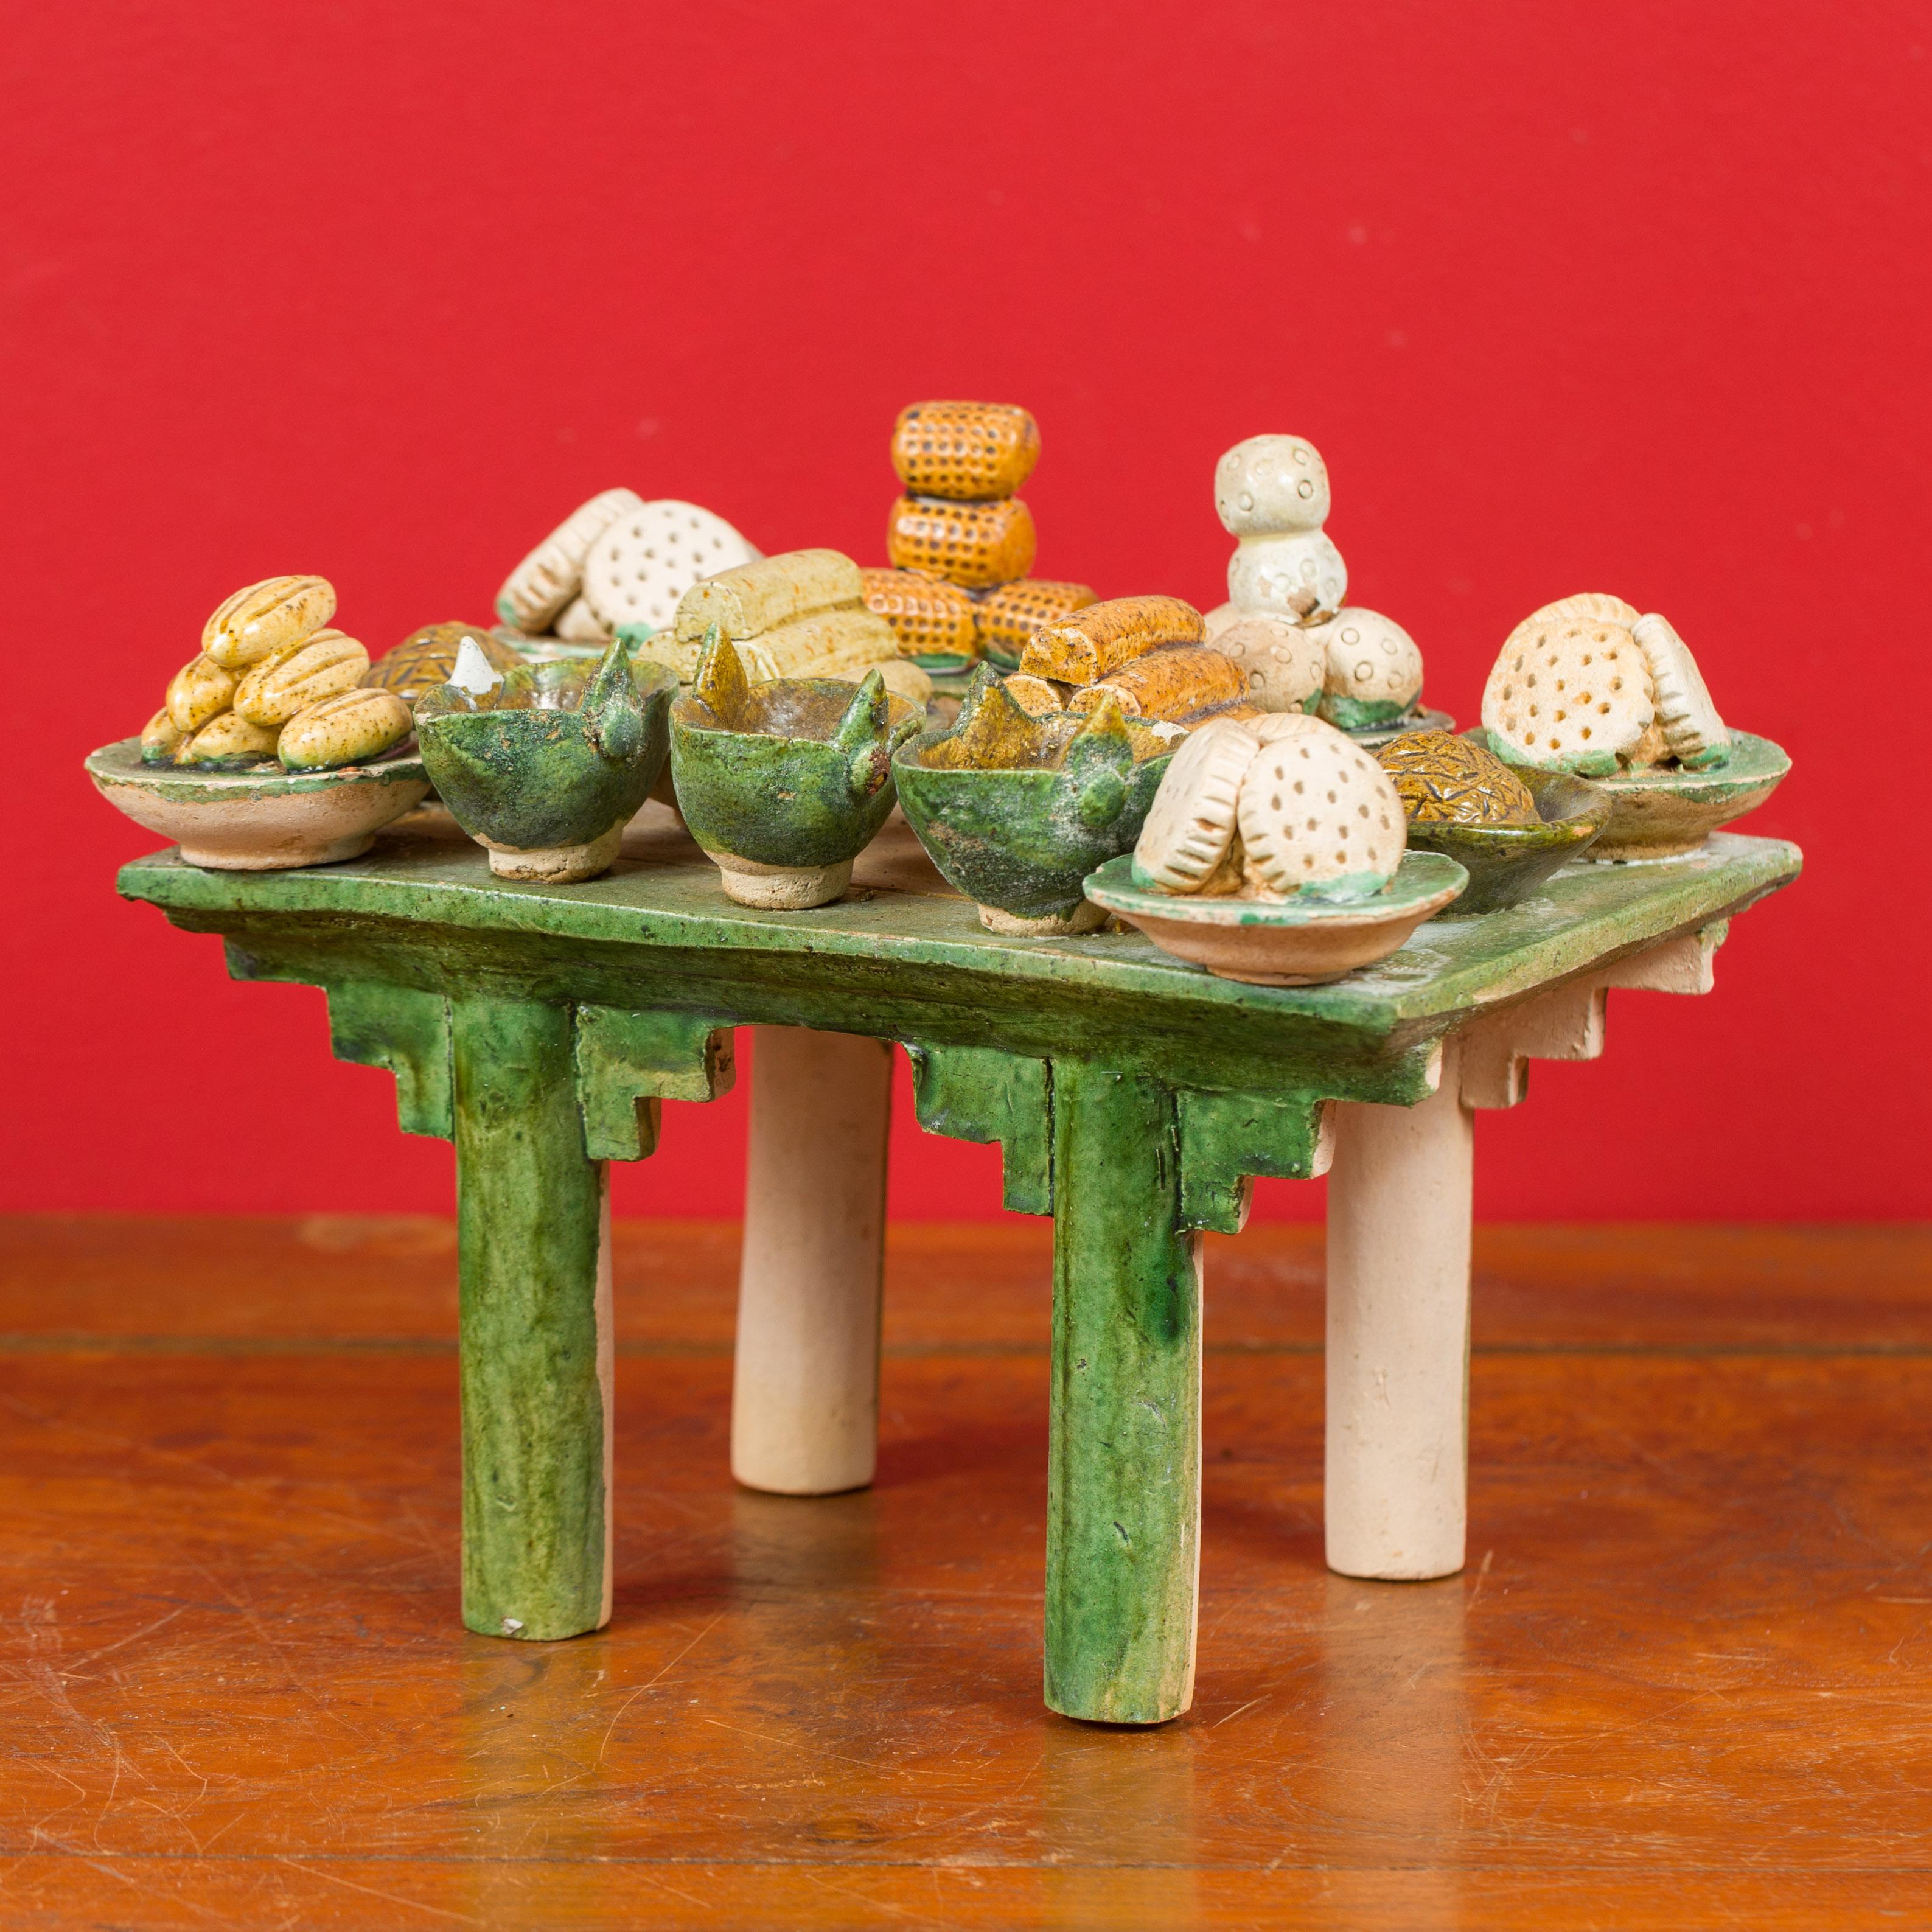 A Chinese Ming dynasty period glazed terracotta funeral table mingqi from 15th-16th century with food and drinks. Created in China during the Ming Dynasty, this terracotta funeral table showcases a typical Chinese altar, painted in green with